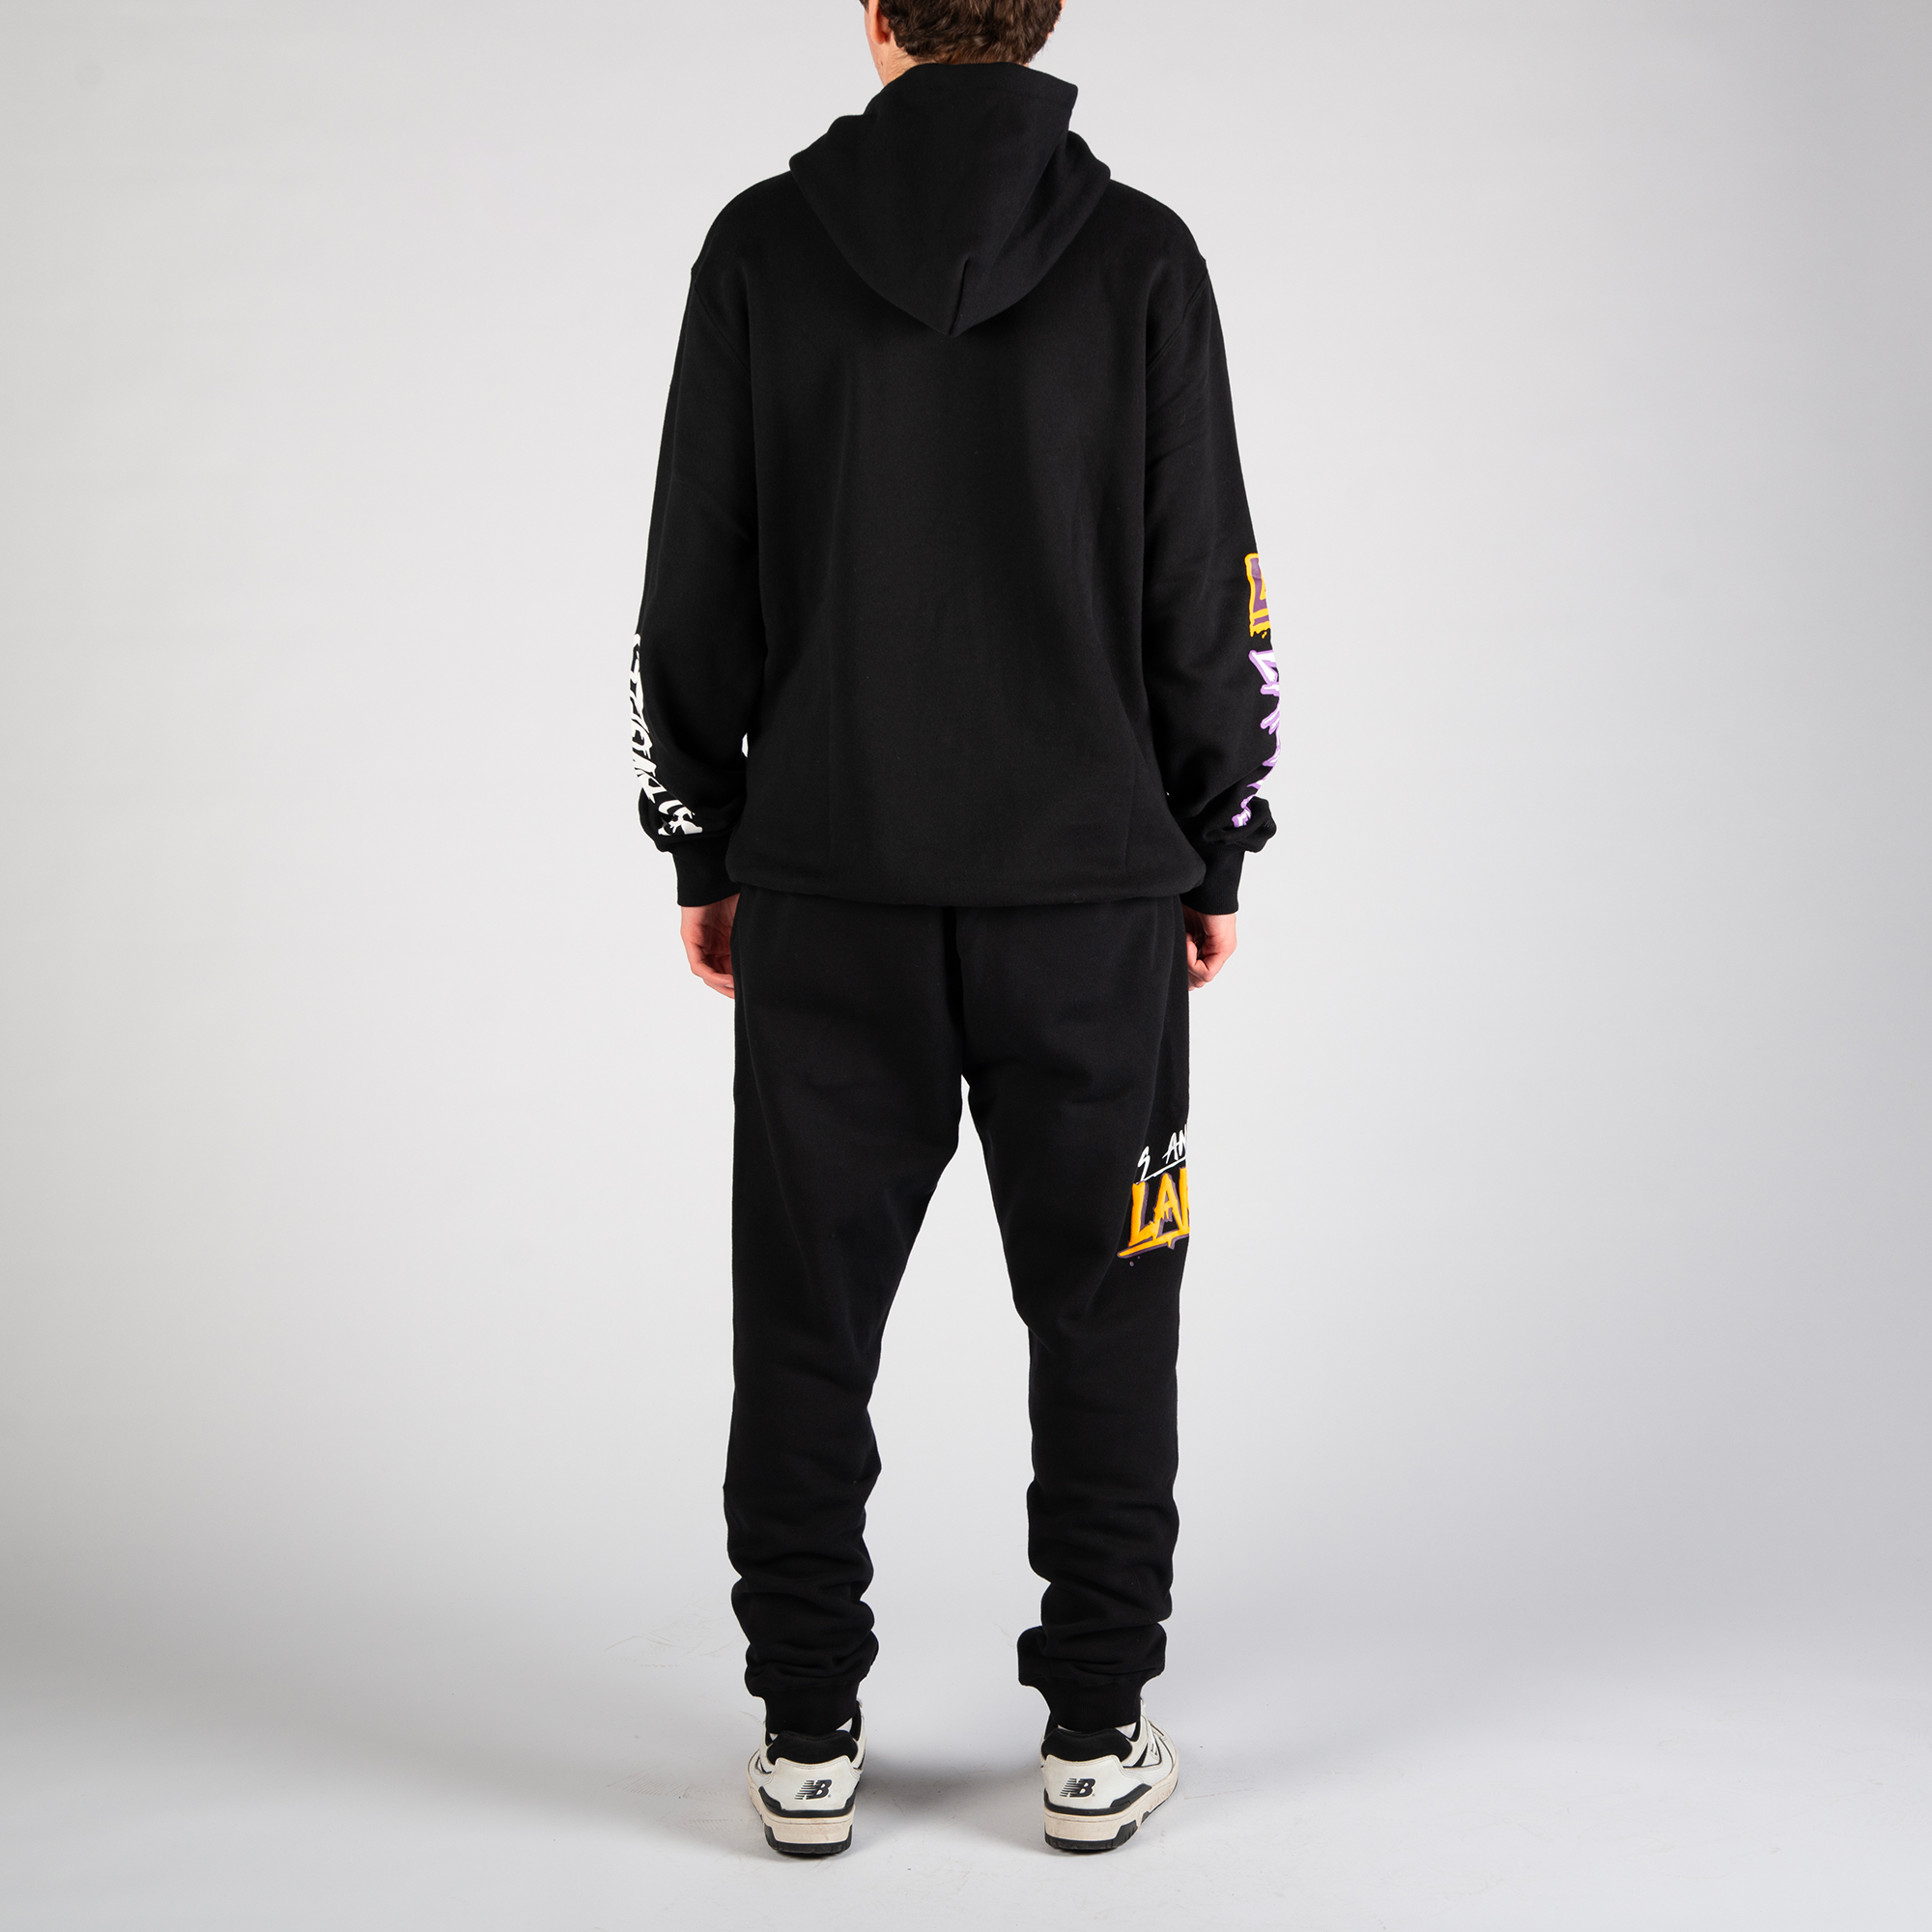 Mitchell and Ness Los Angeles Lakers Slap Sticker Sweatpant Black